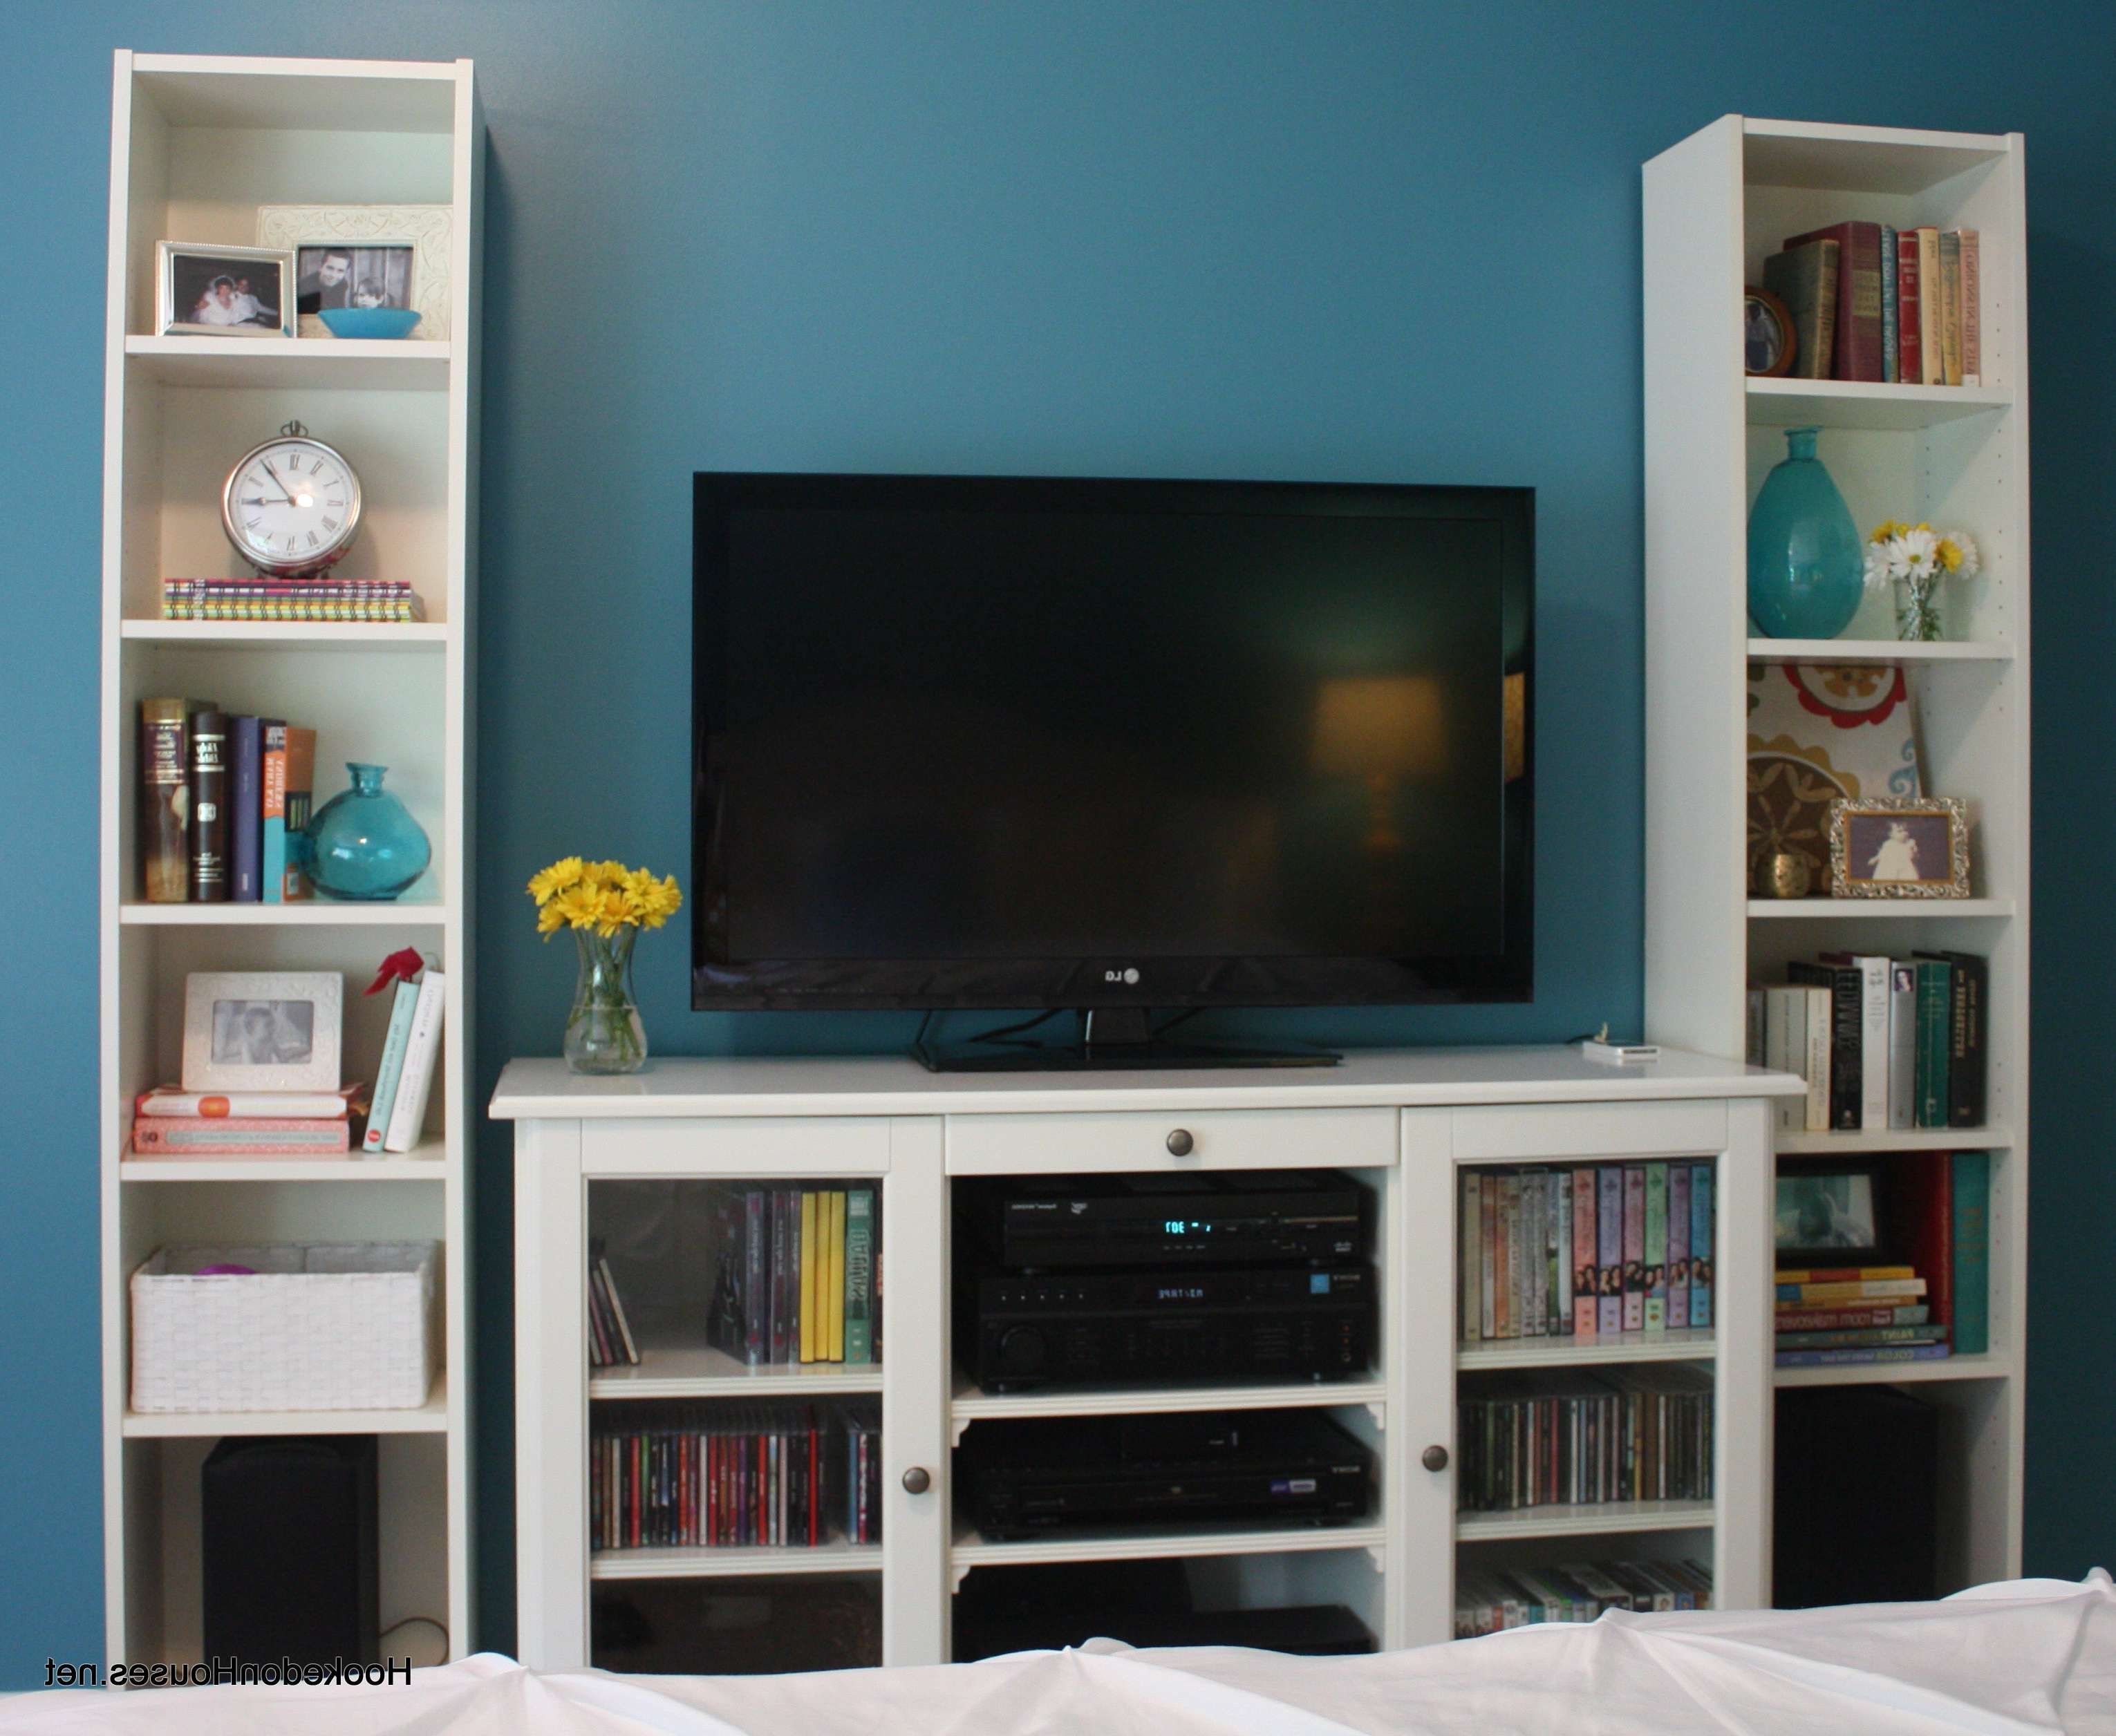 Tv Cabinet And Bookshelves – Hooked On Houses For Bookshelf Tv Stands Combo (View 1 of 15)